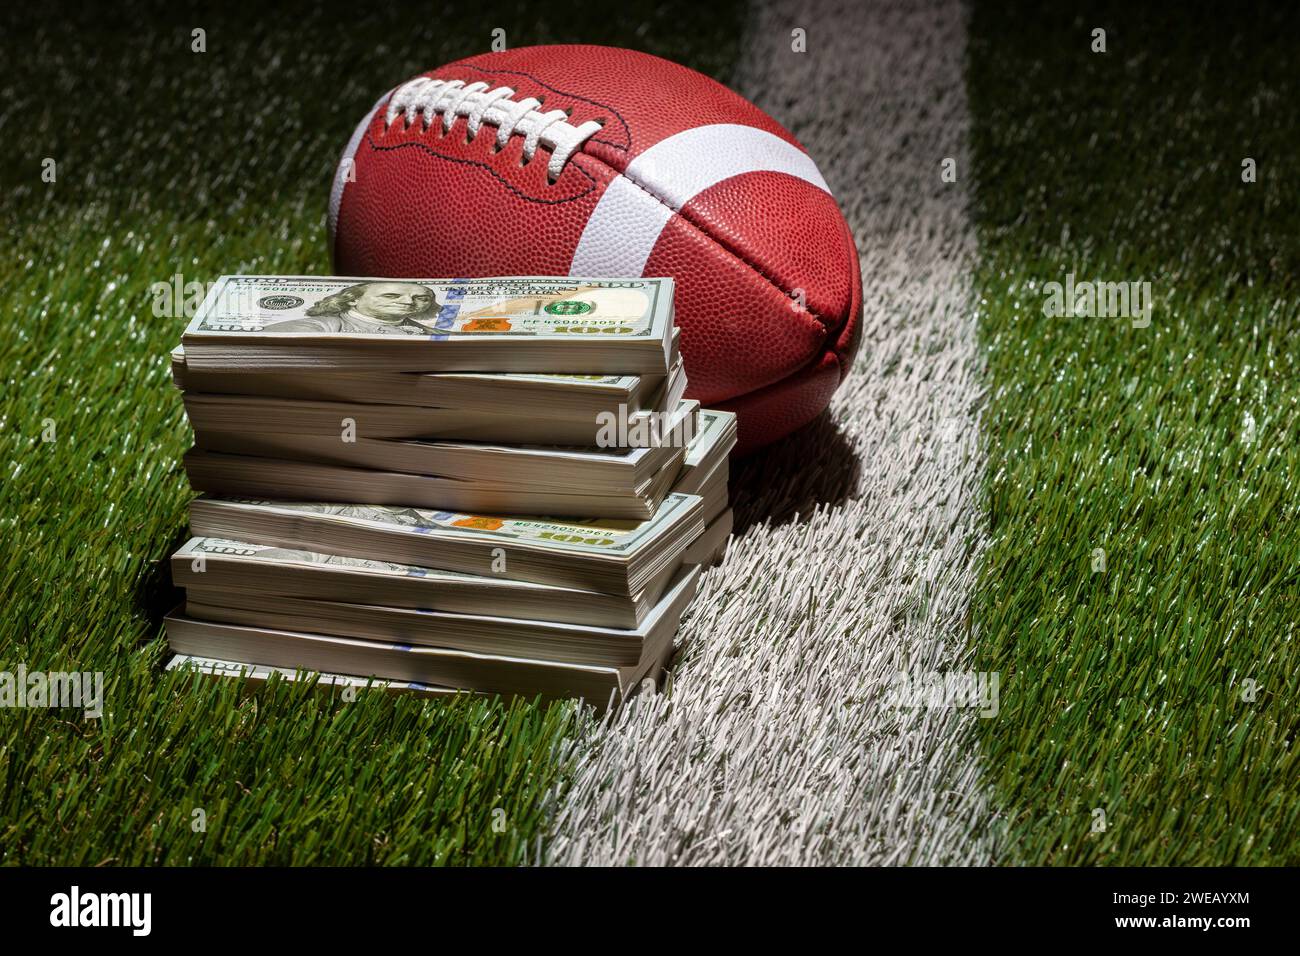 A football and a pile of one hundred dollar bills on a grass field with stripe and dark background Stock Photo